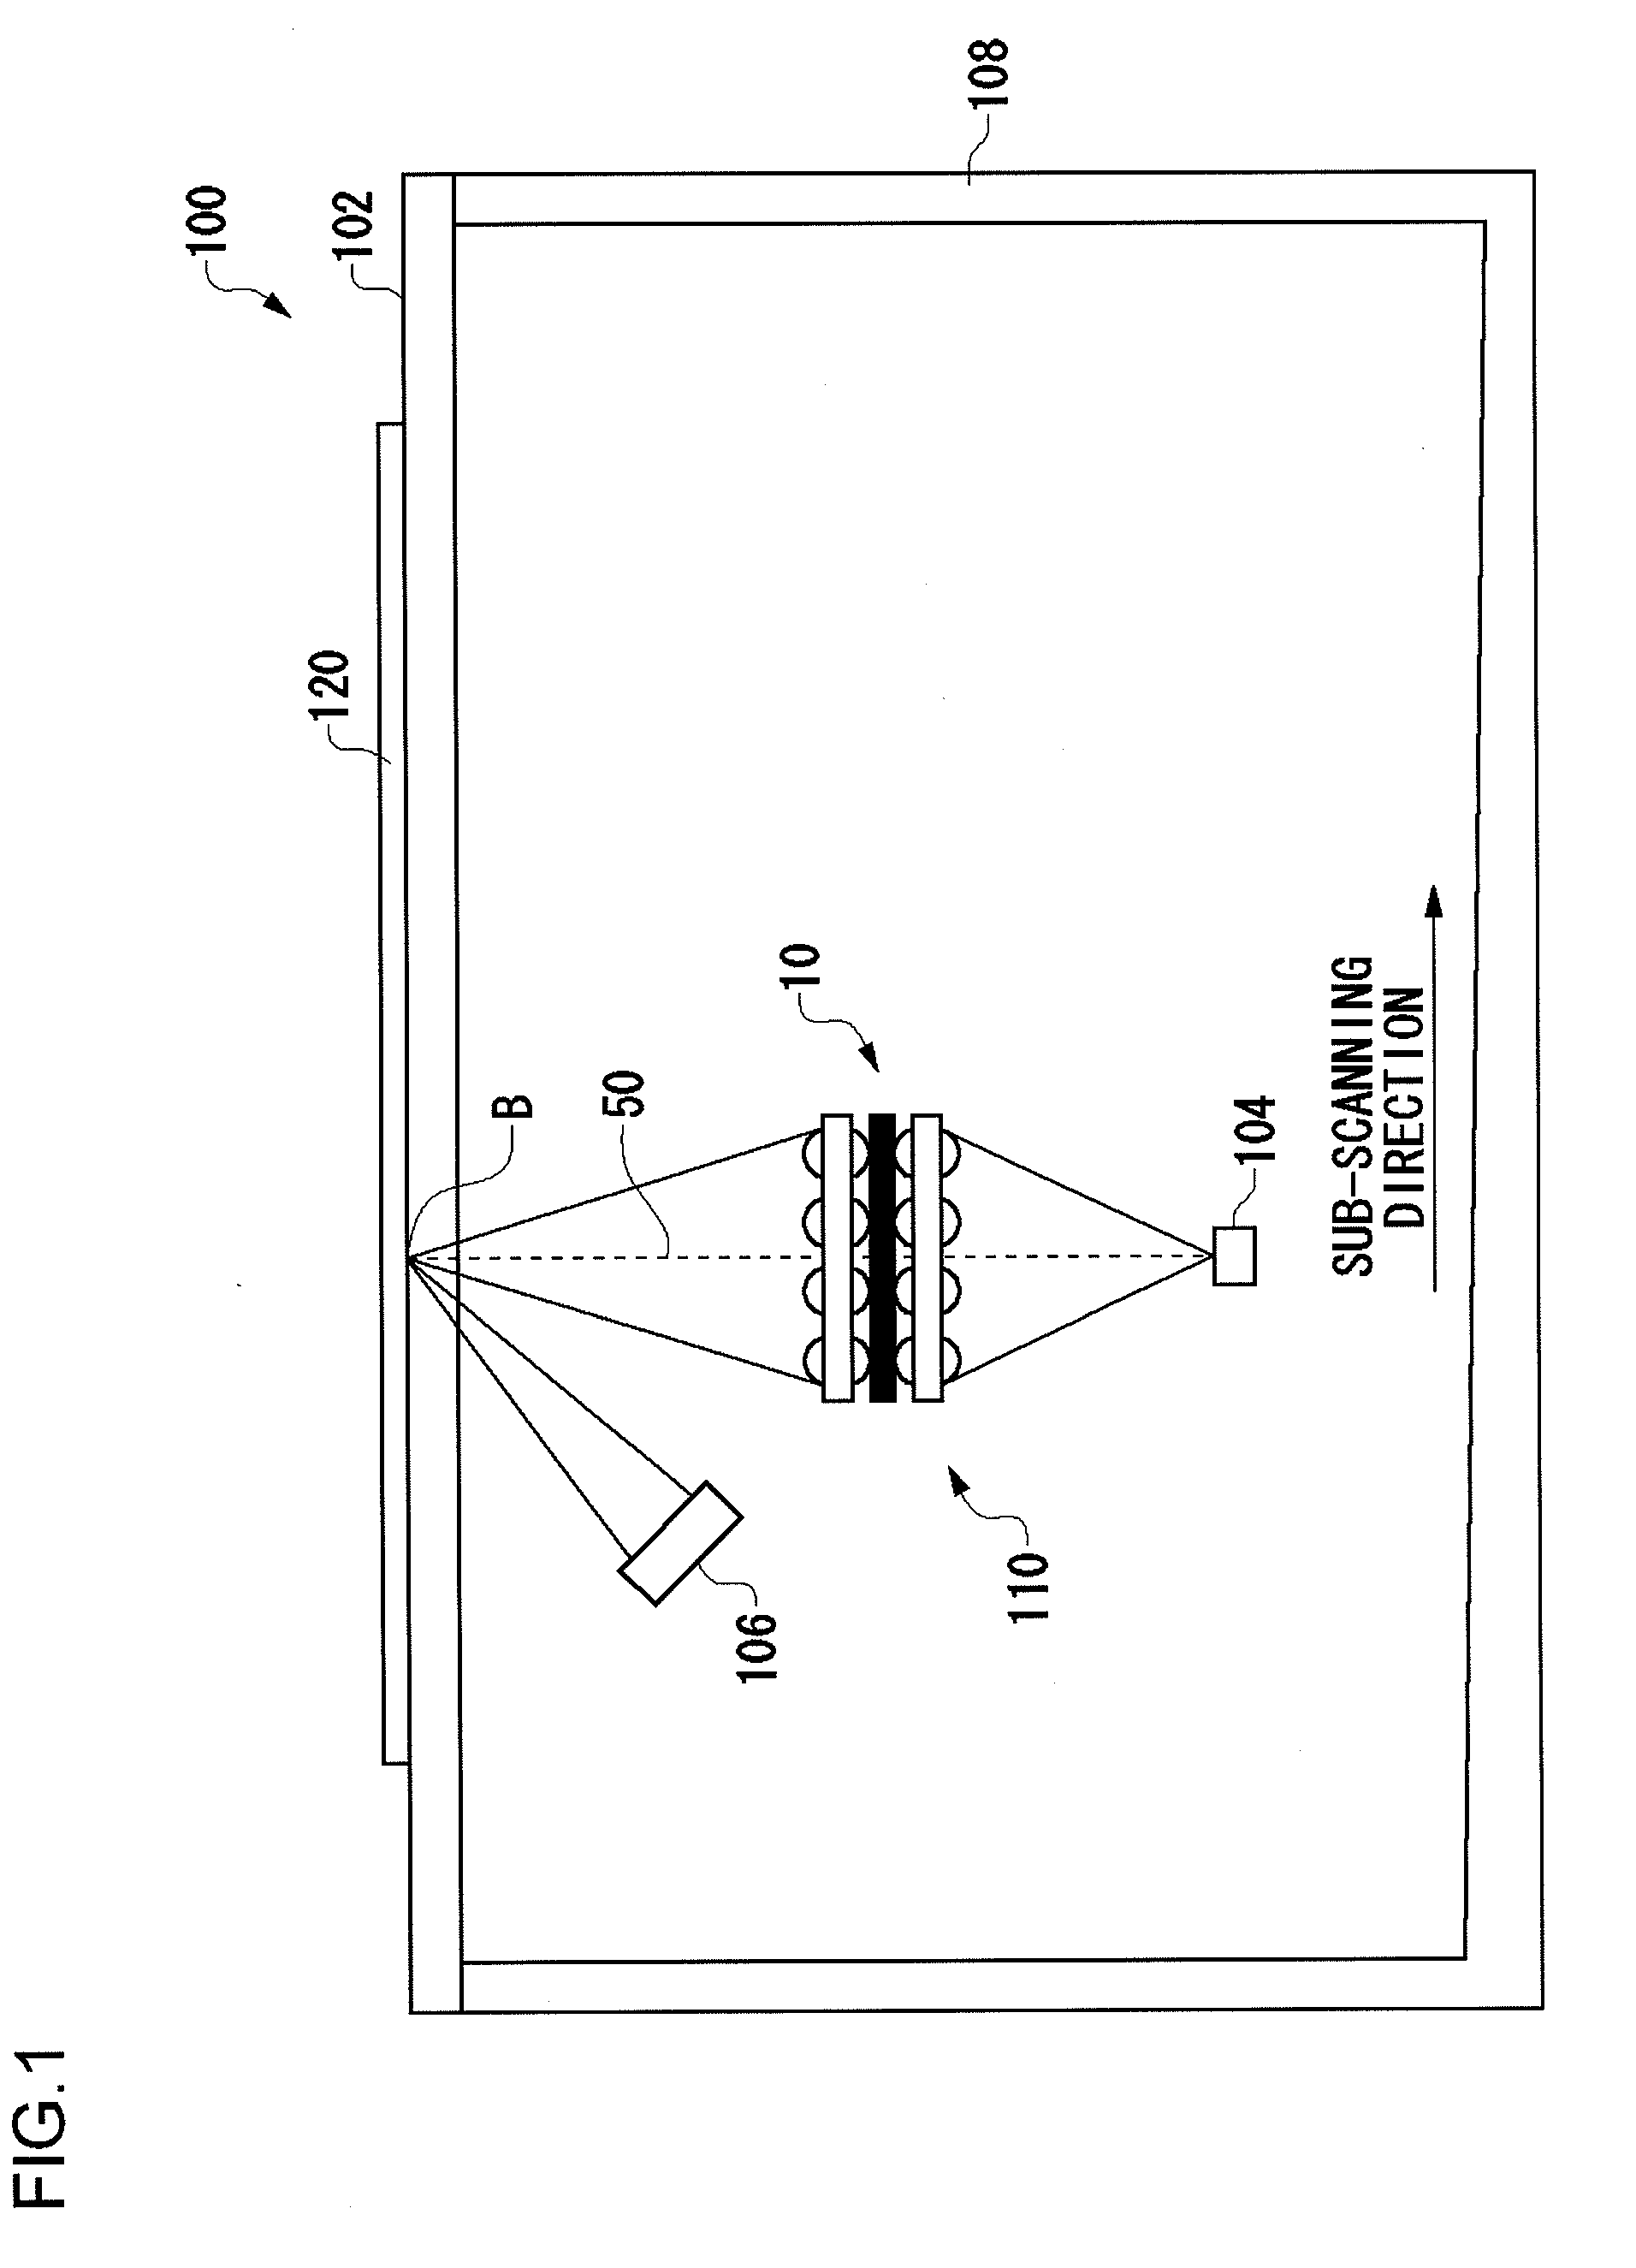 Erecting equal-magnification lens array plate, image sensor unit, and image reading device